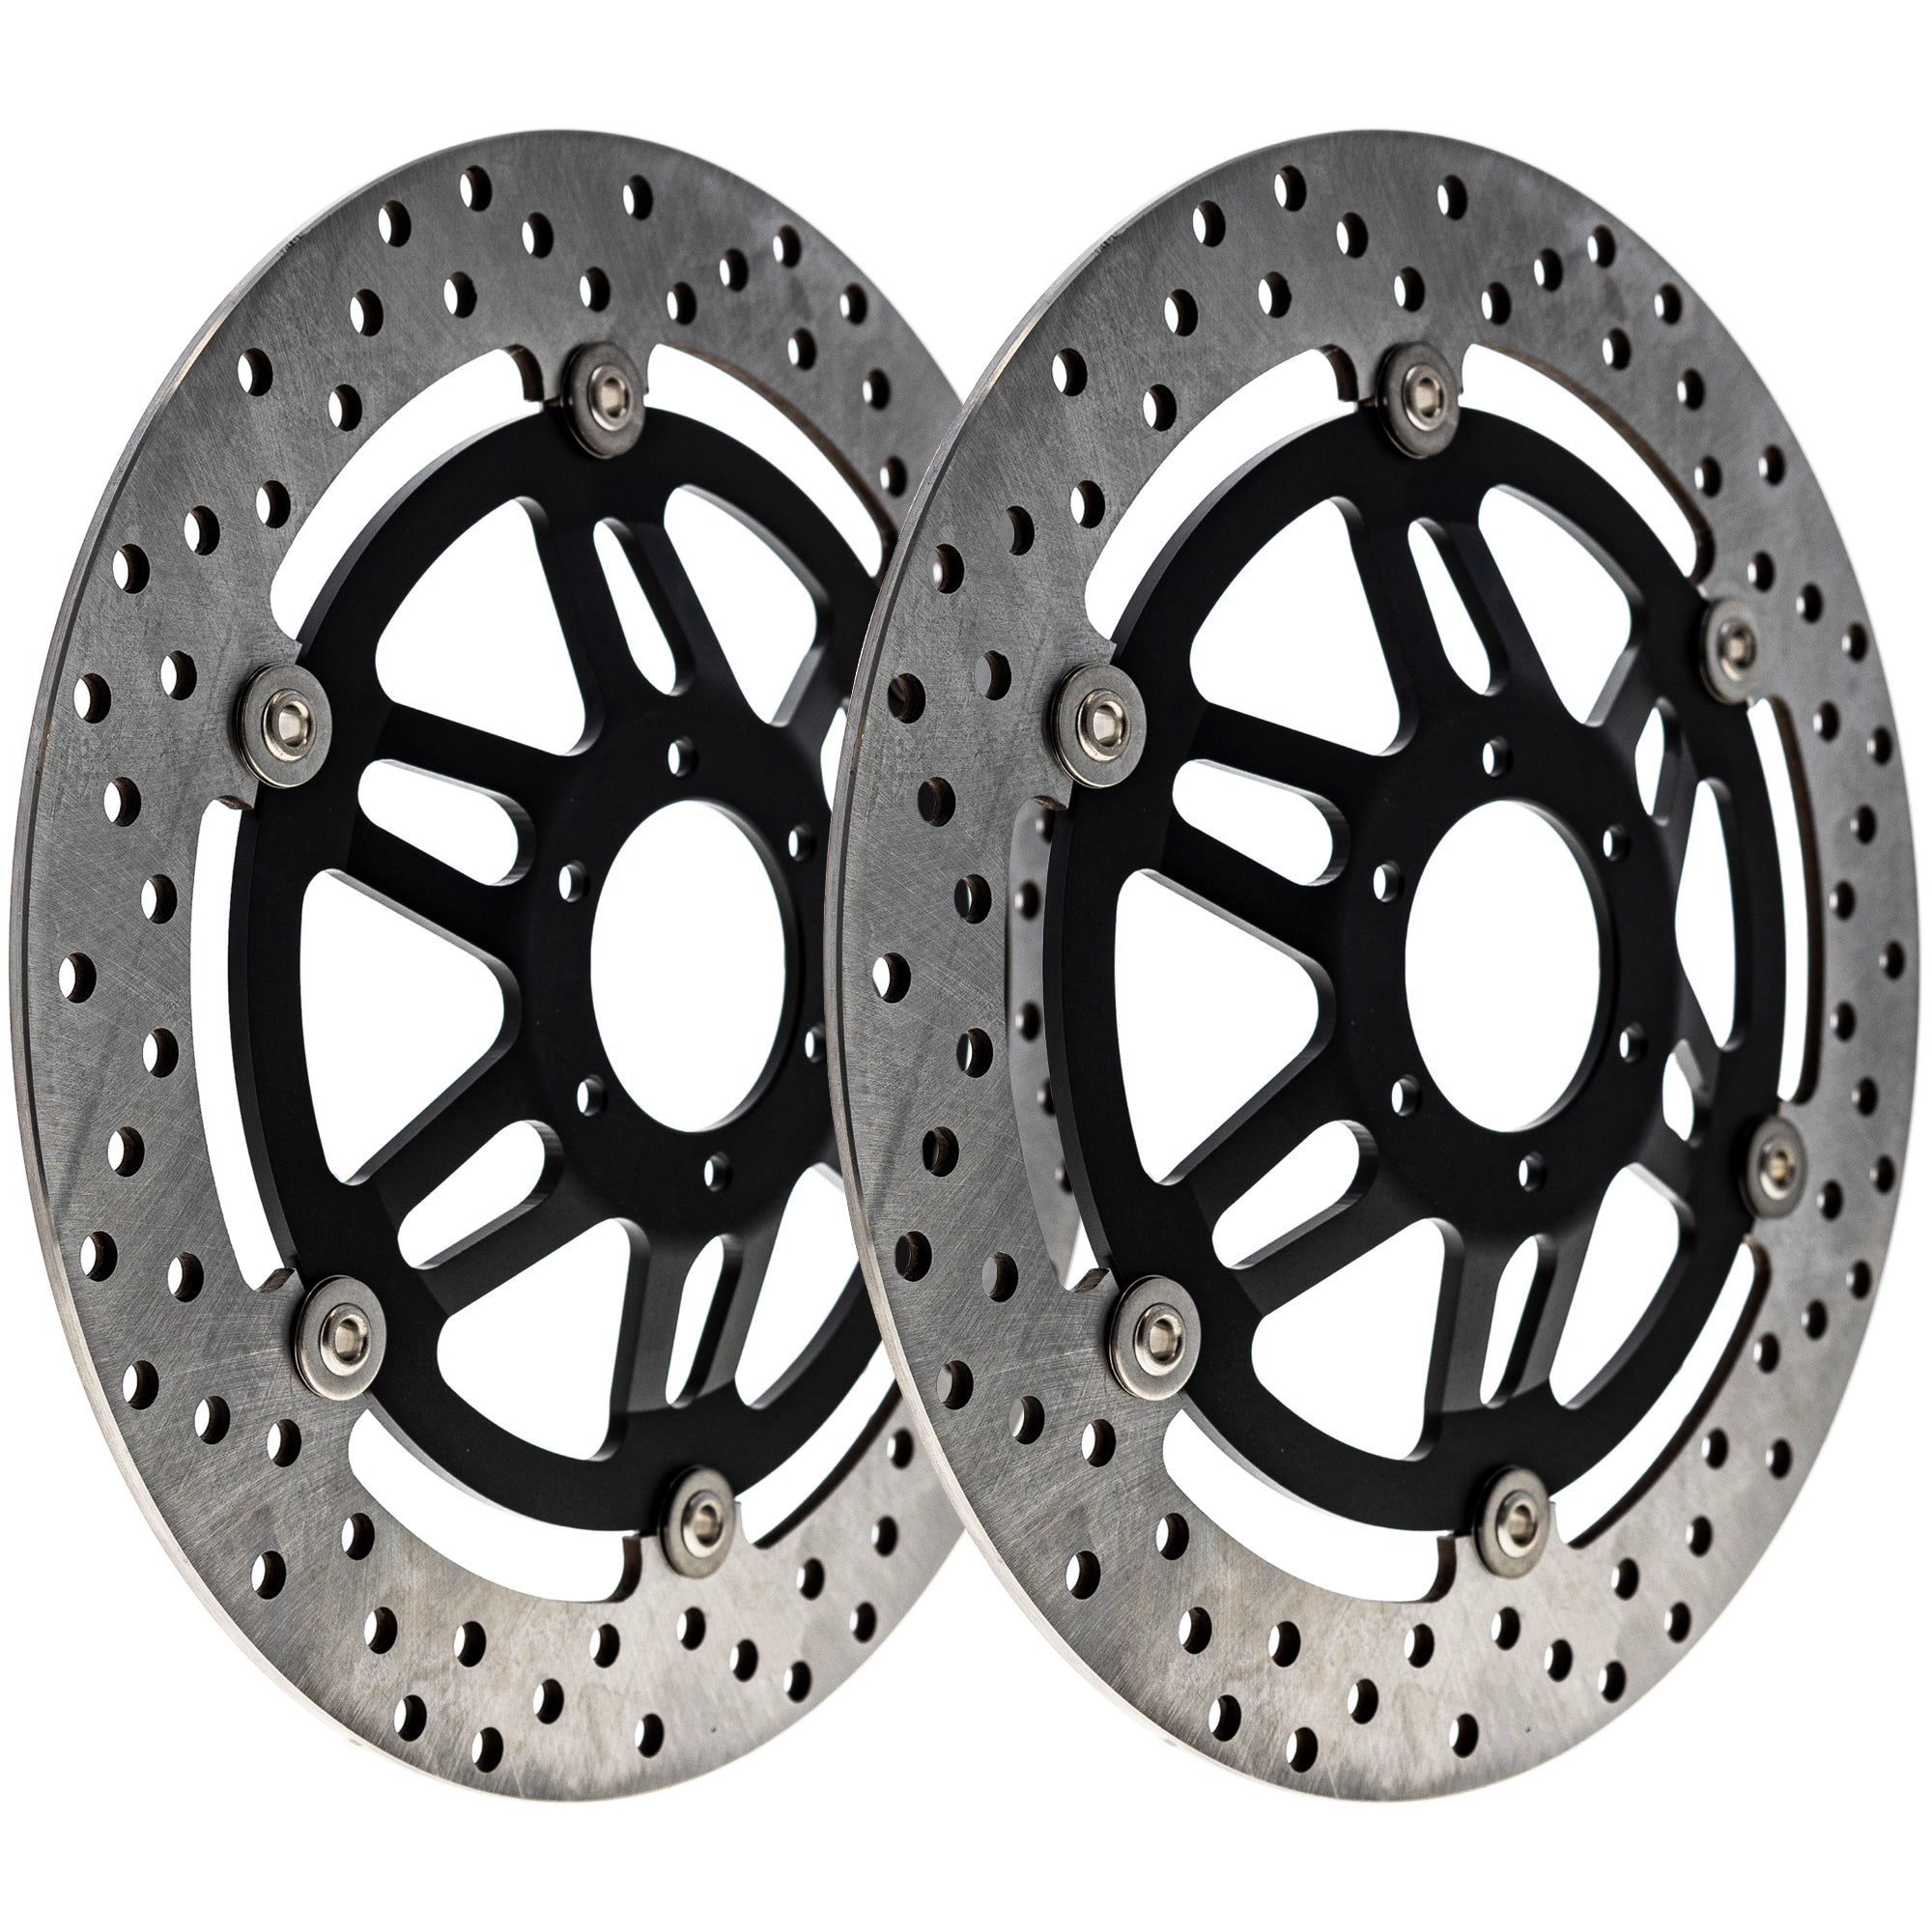 Front Brake Rotor 2-Pack for zOTHER Z1000 Ninja NICHE 519-CRT2209R